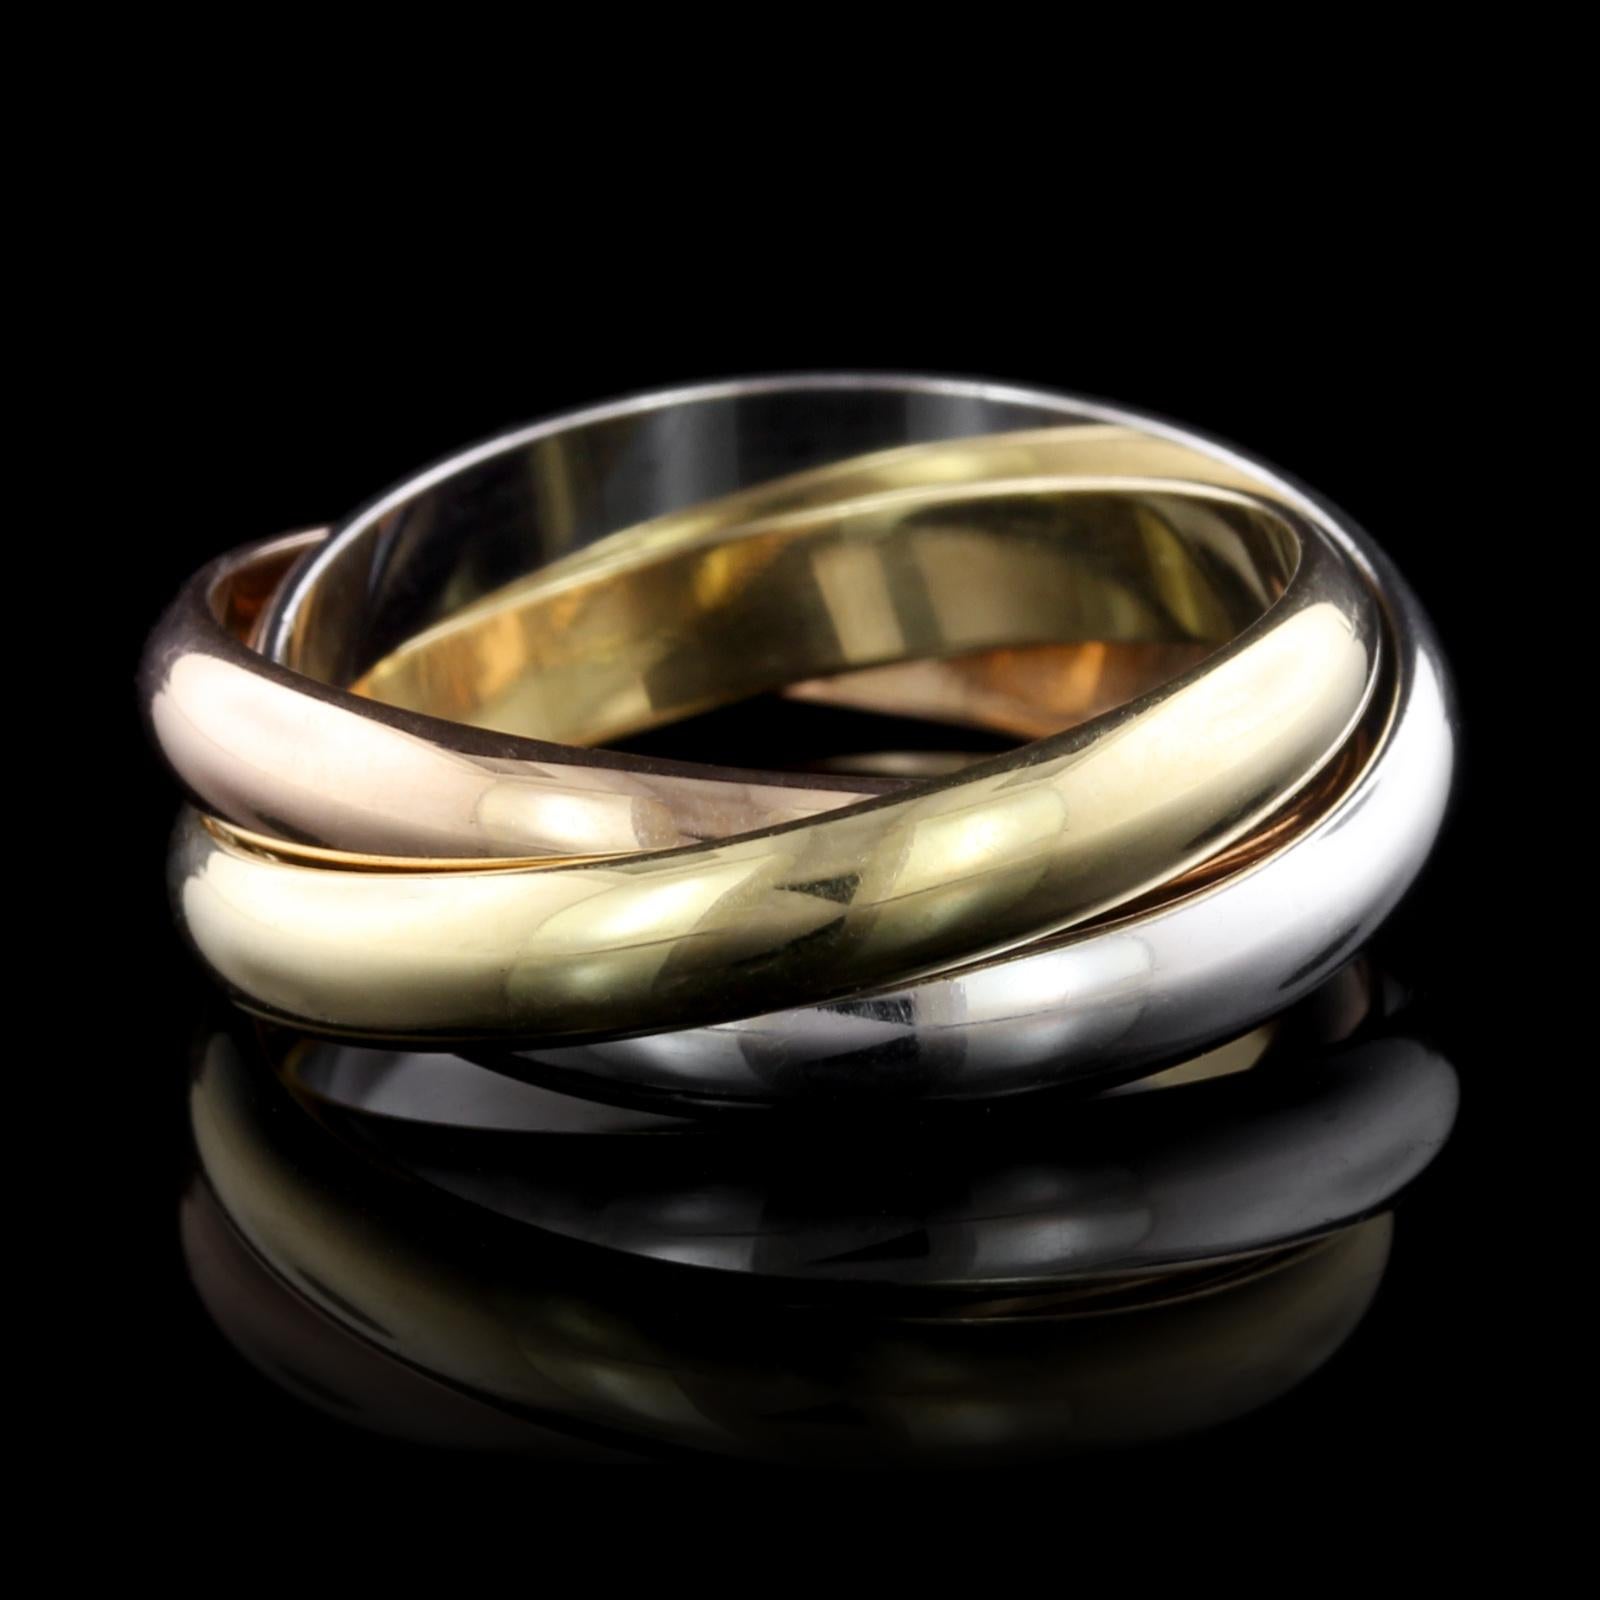 Cartier 18K Tricolor Gold Trinity Rolling Ring. The ring is designed with three
interlaced 3.50mm. bands symbolizing love, fidelity and friendship, #HW6255,
size 59, U.S. size 8 3/4.